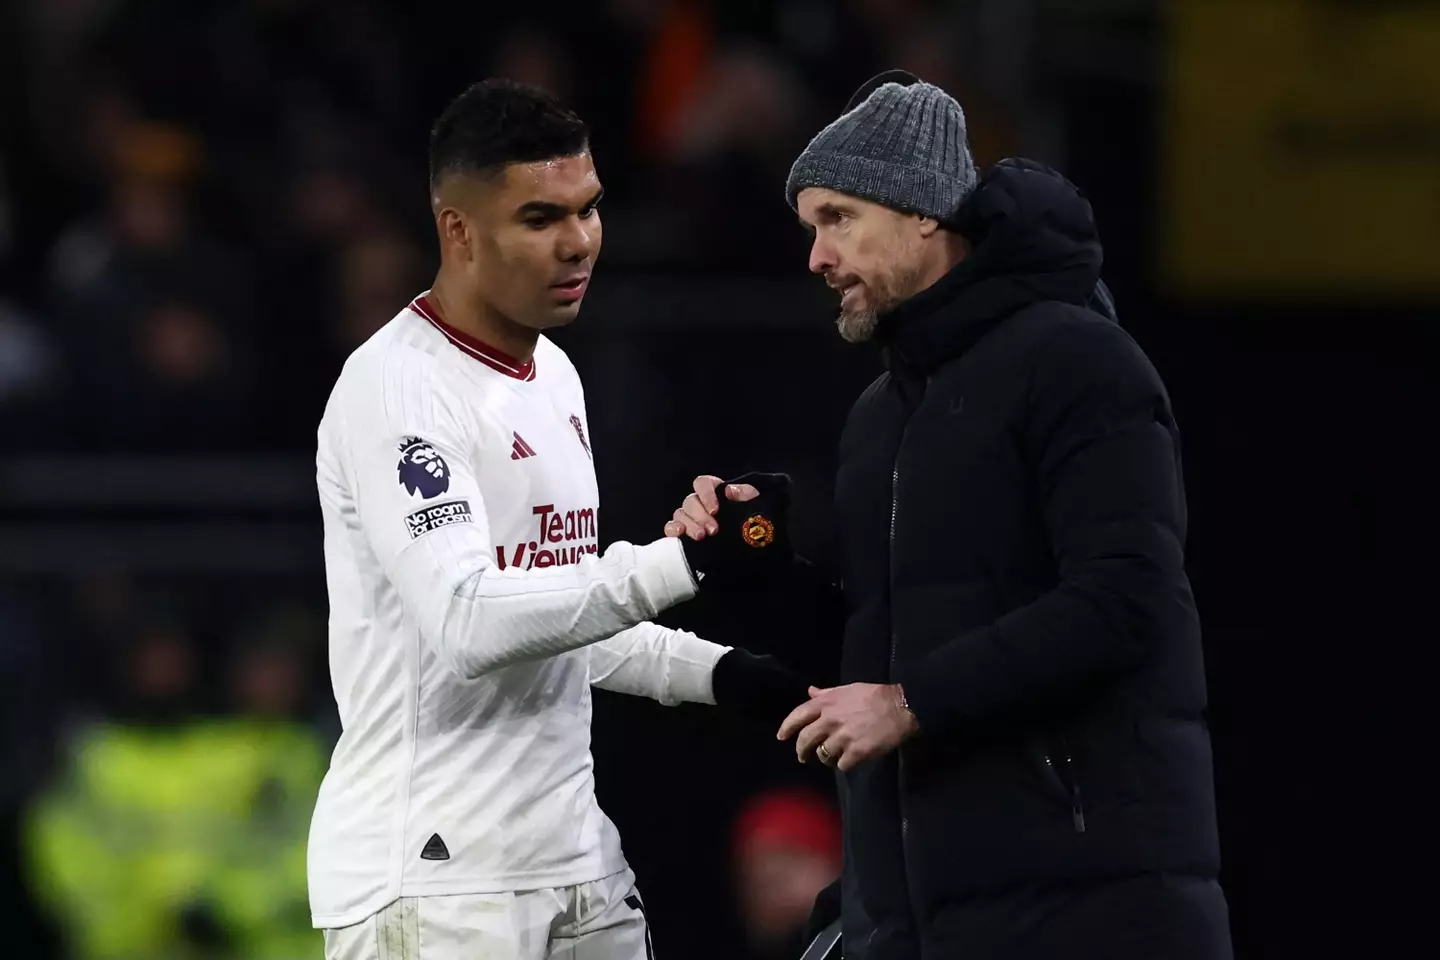 Ten Hag believes Casemiro has a reputation with Premier League referees. (Image